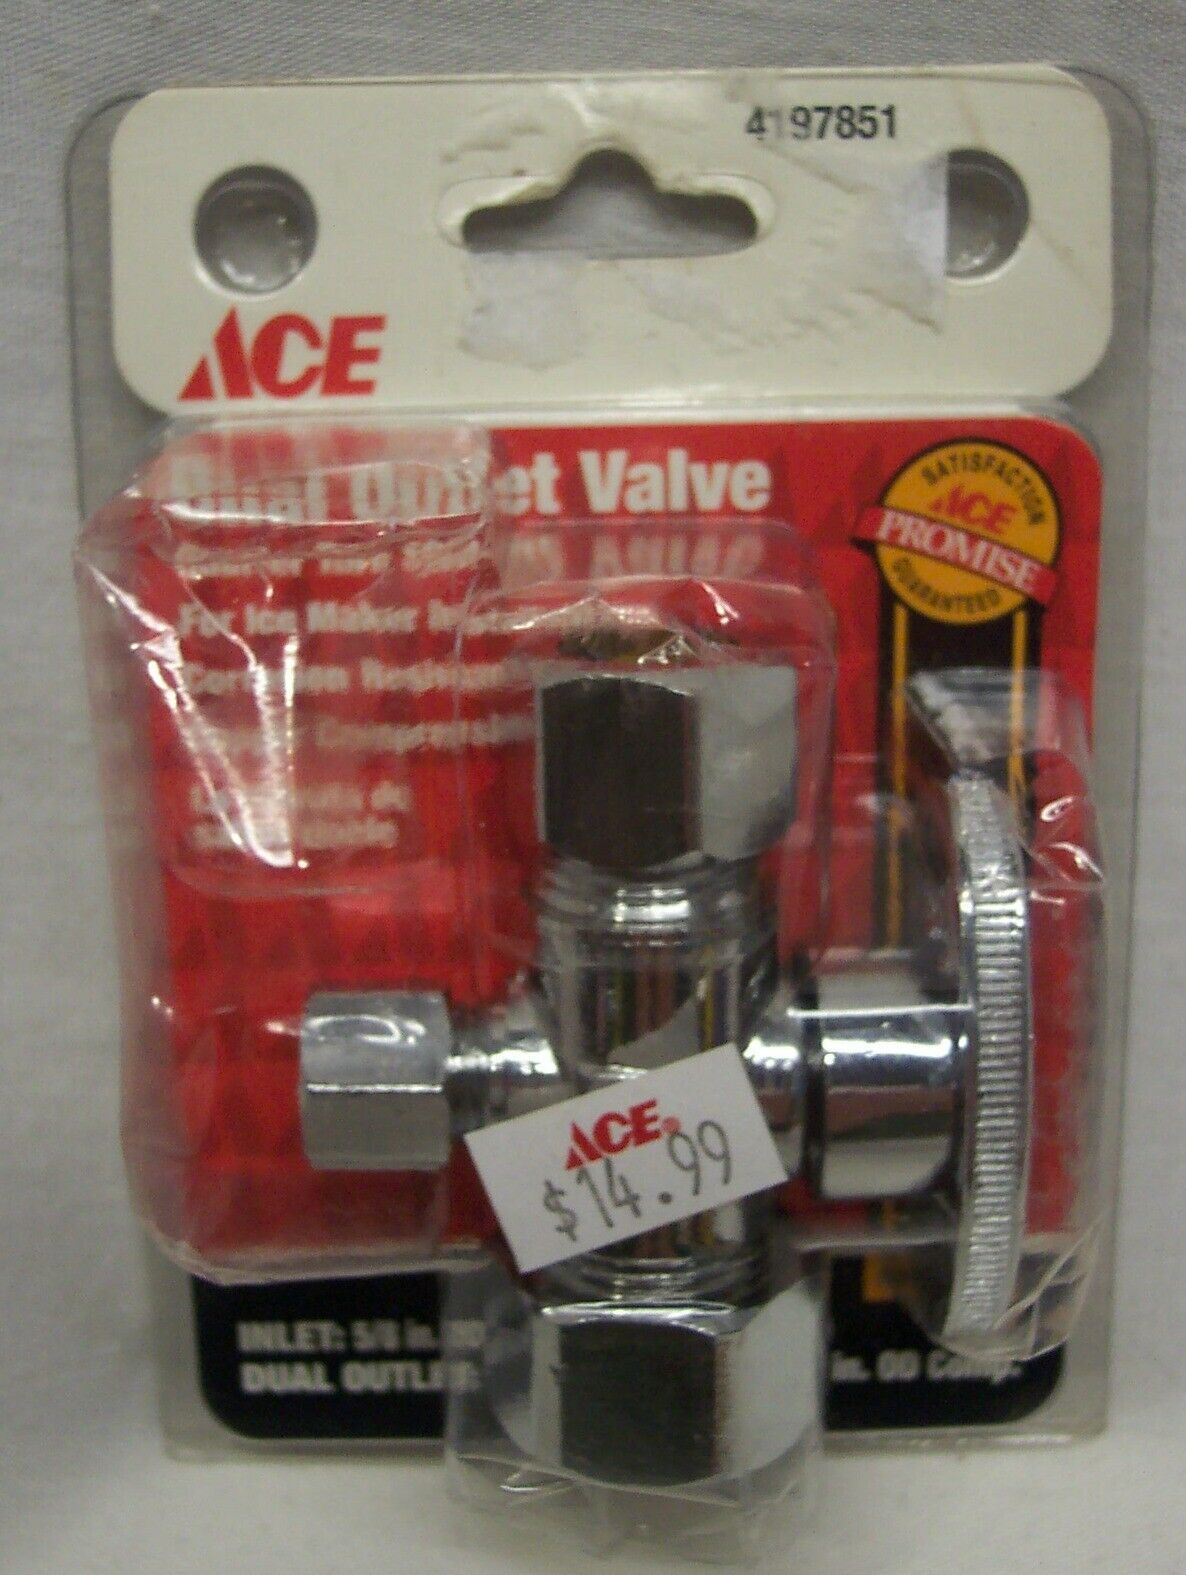 ACE 4197851 Dual Outlet Valve, Inlet 5/8", Dual Outlet 1/2" x 1/4" NEW - $9.90